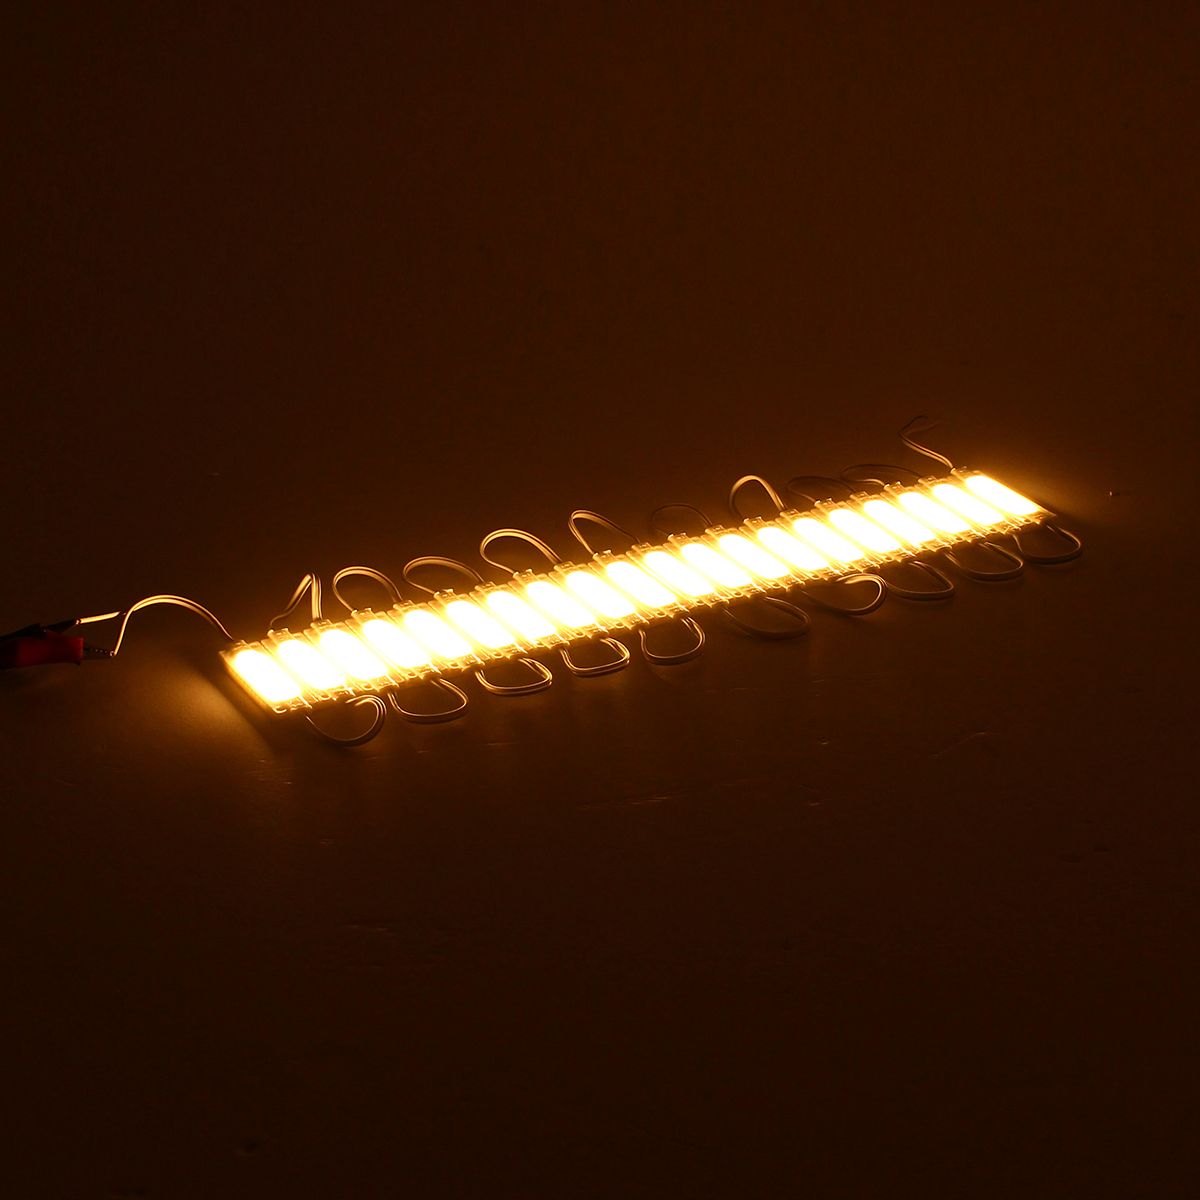 20PCS-16W-SMD5730-Pure-White-Warm-White-LED-Module-Strip-Light-for-Mirror-Advertisement-Sign-DC12V-1292876